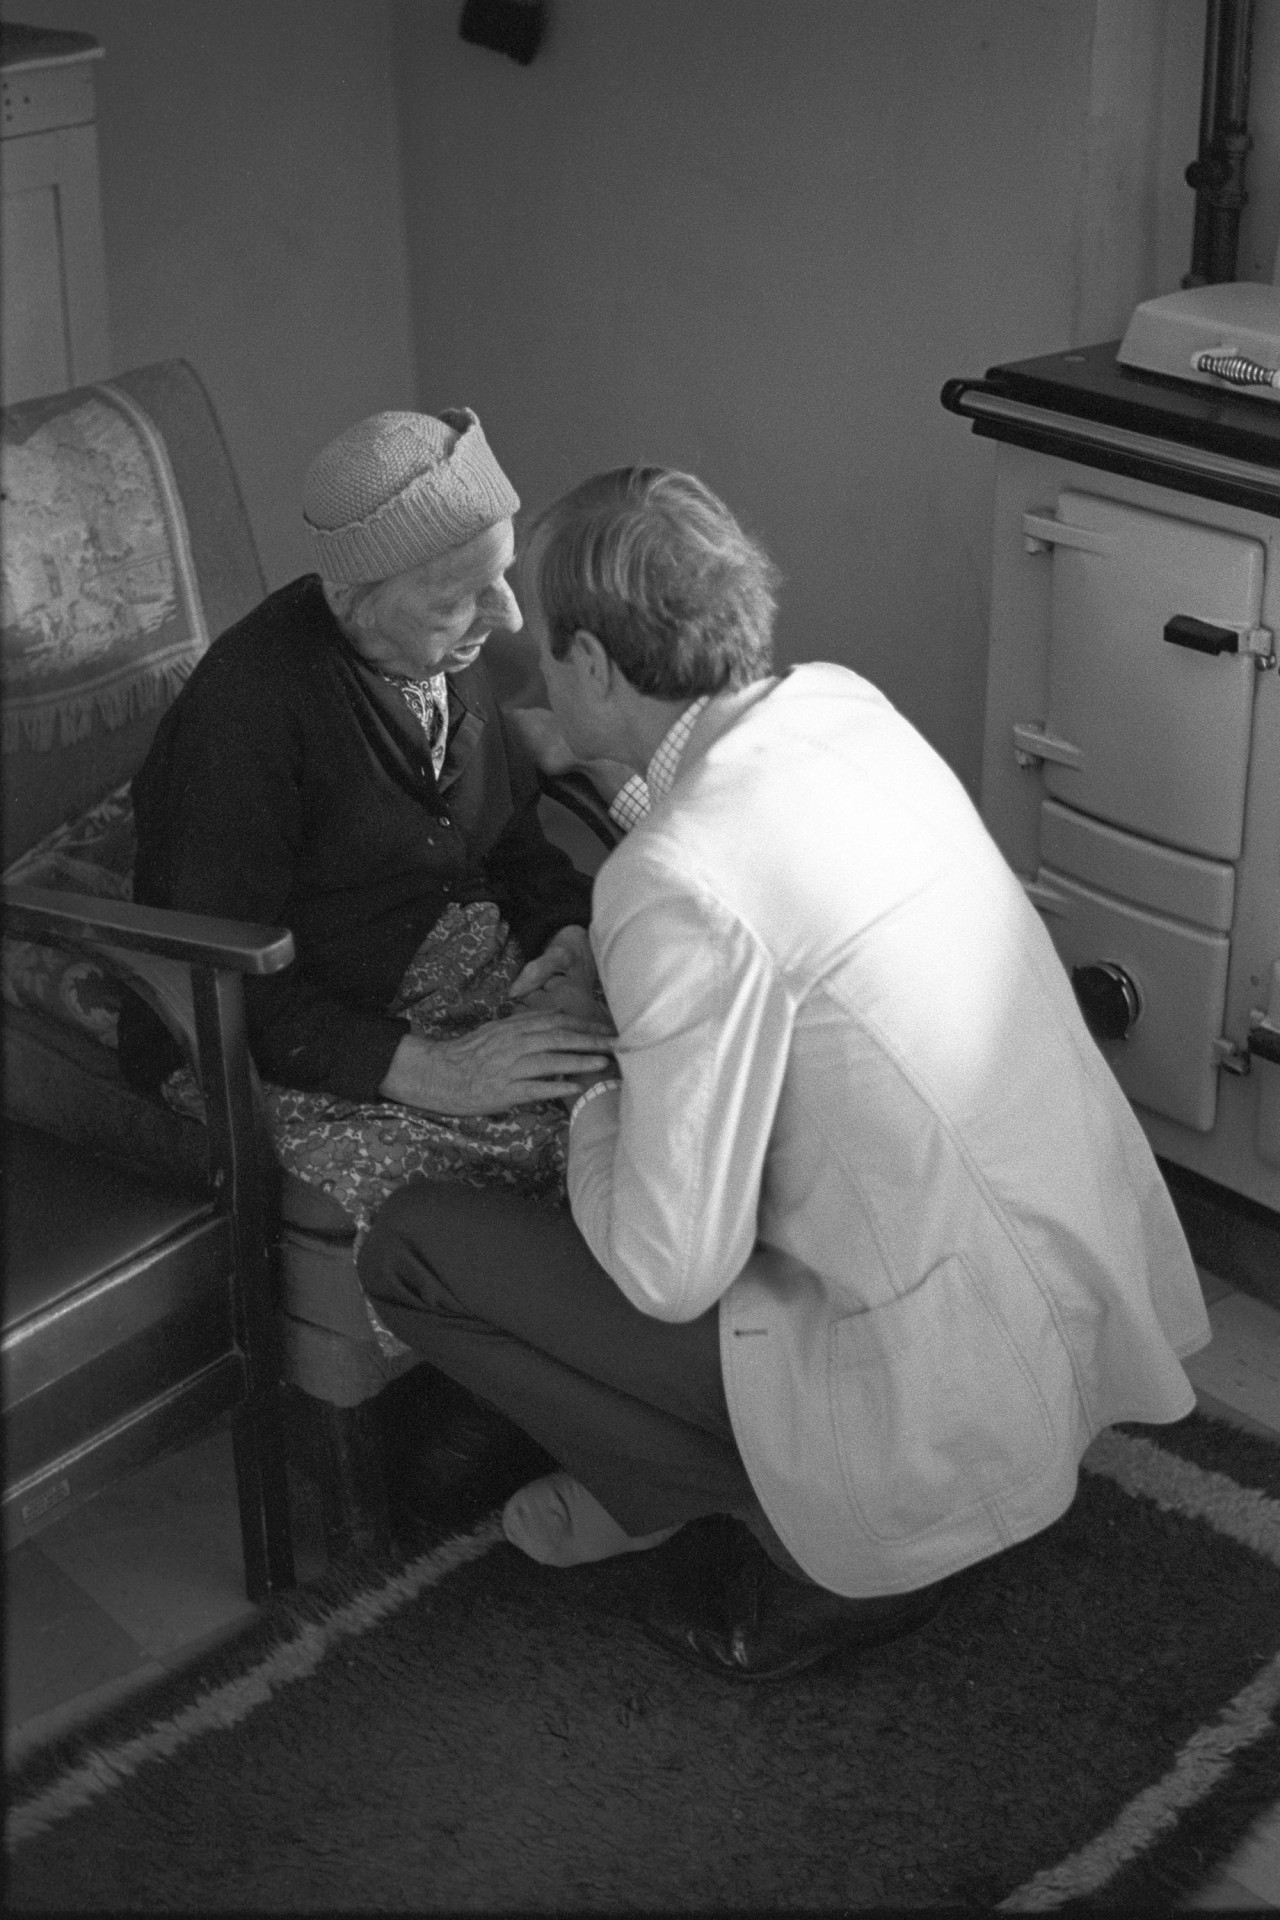 Doctor visiting elderly woman blind and in her nineties, but read braille. <br /> [Doctor Richard Westcott visiting Lizzie Symons at her home near Warkleigh. He is talking to her in front of an Aga or rayburn stove. She is blind and over ninety years old.]